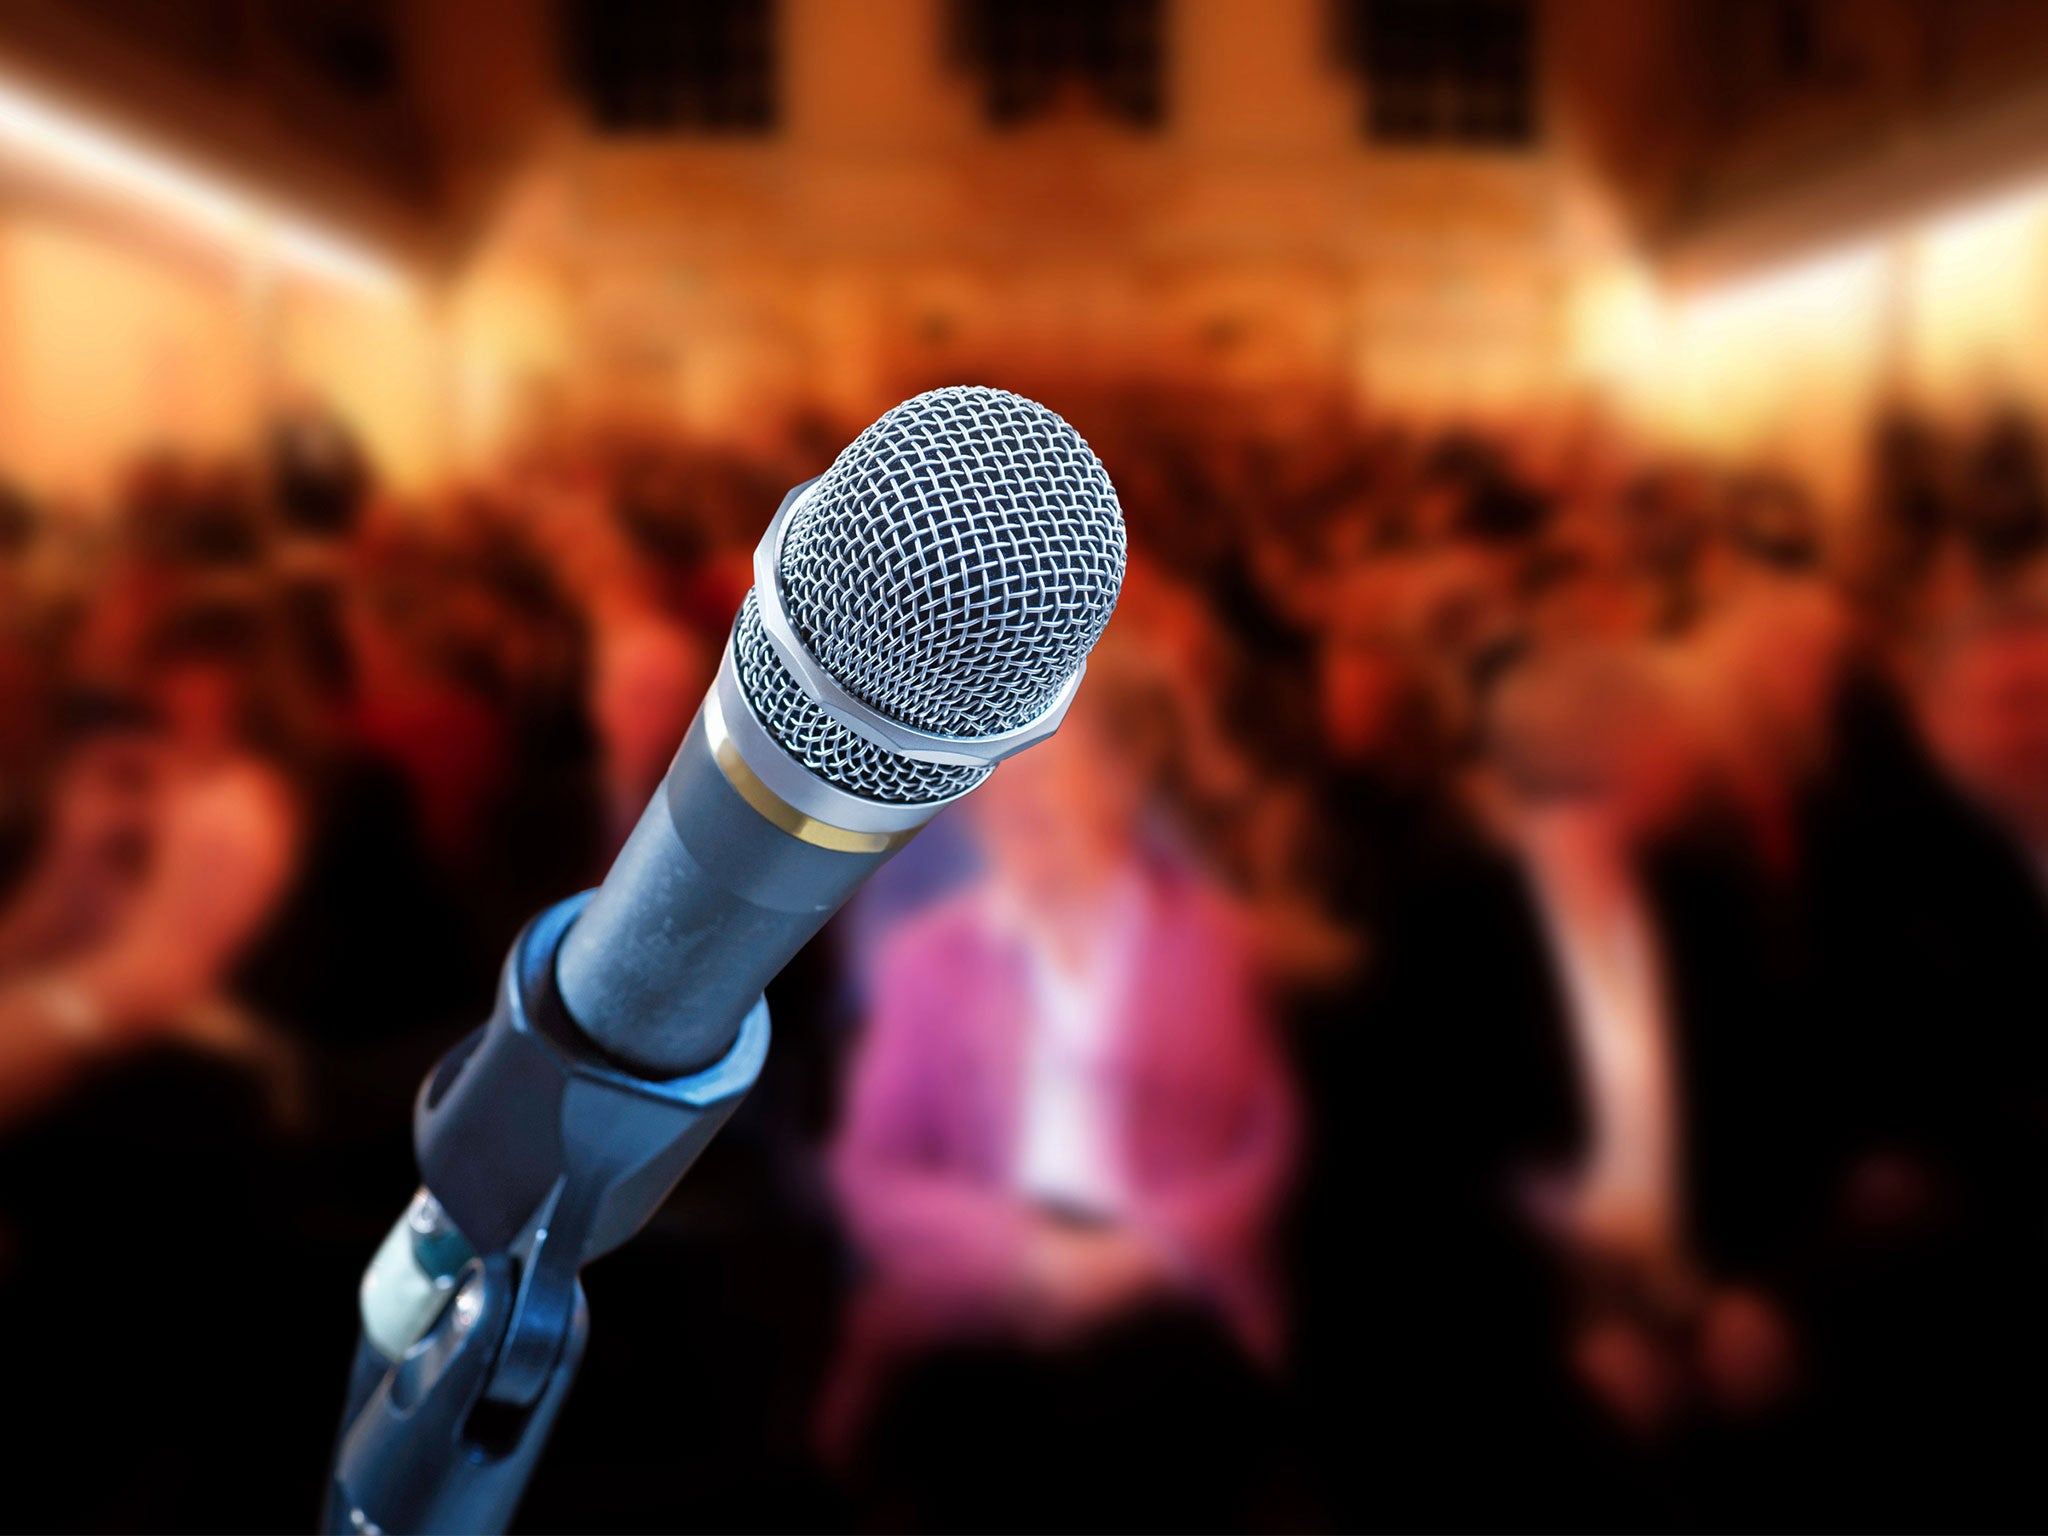 Learn how to perform and write your own material as a stand-up comic at the University of Kent